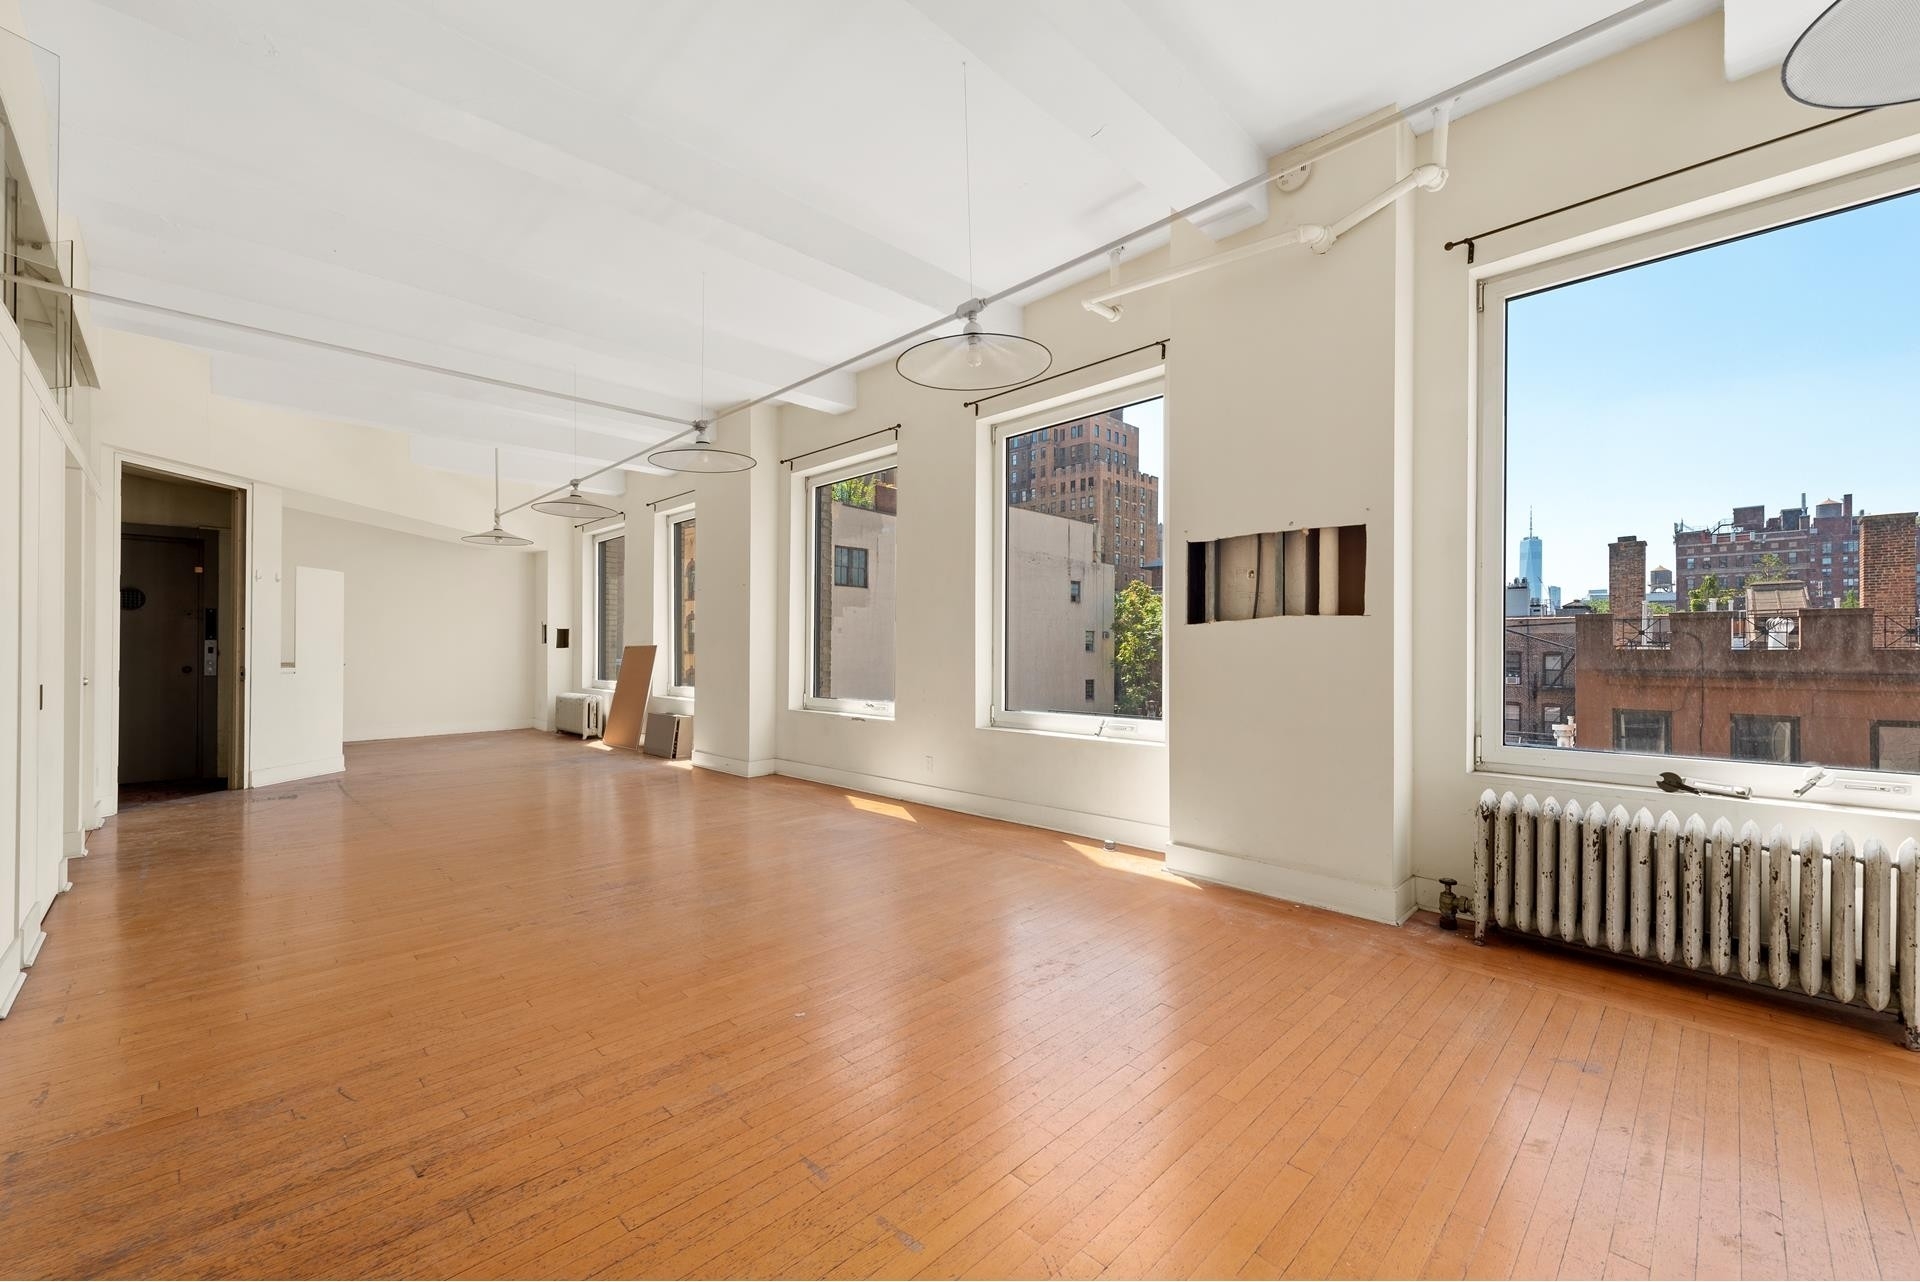 5. Co-op Properties for Sale at 227 W 17TH ST, 5 Chelsea, New York, NY 10011